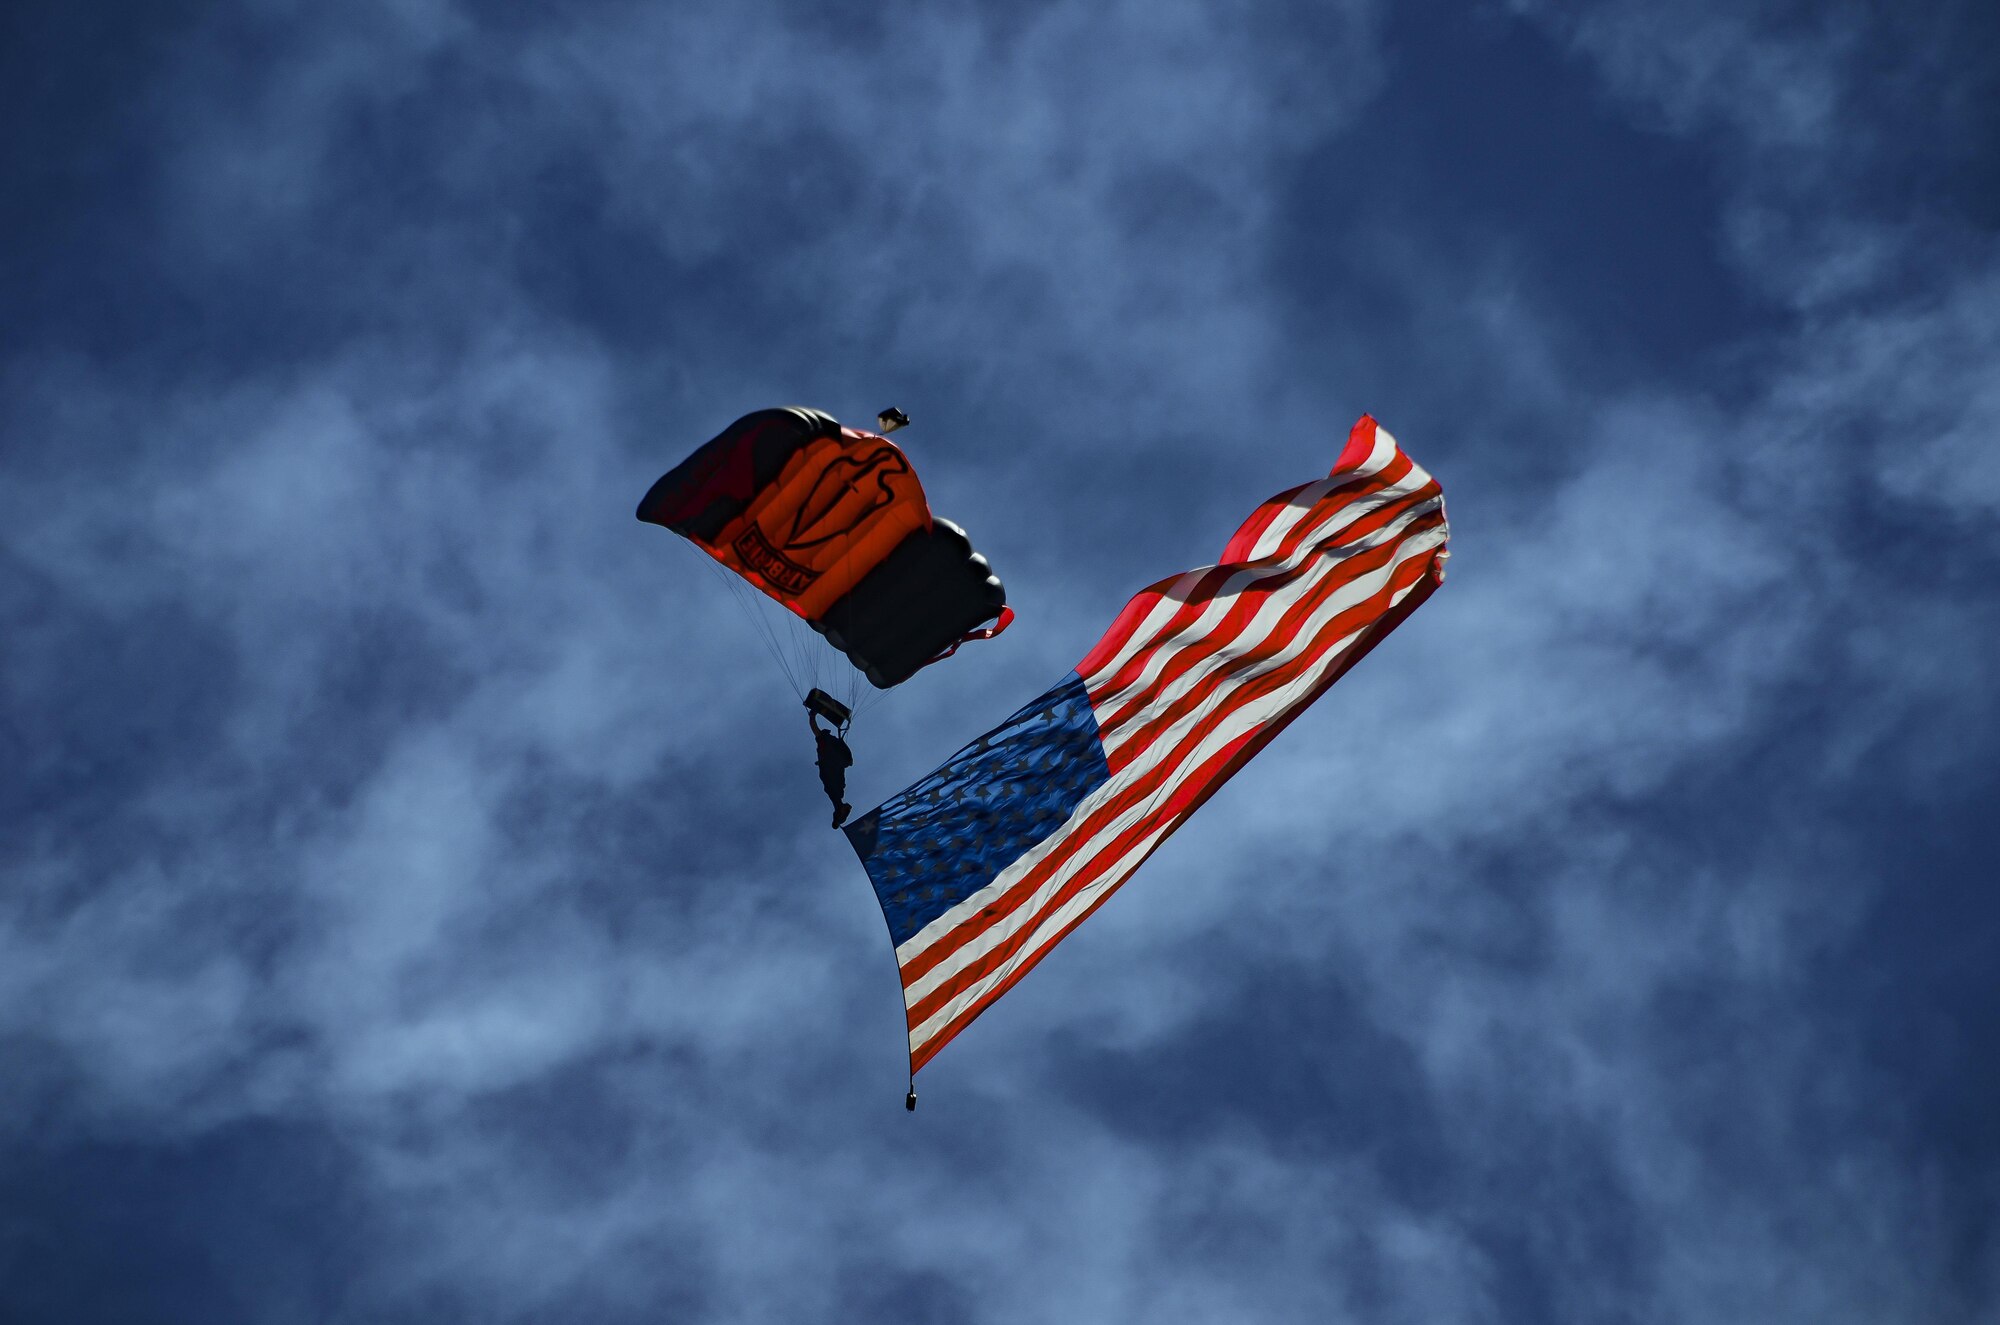 The U.S. Army Special Operations Command Black Daggers Parachute Team jumps with the American Flag during the South Carolina National Guard Air and Ground Expo at McEntire Joint National Guard Base, South Carolina, May 7, 2017. This expo is a combined arms demonstration showcasing the abilities of South Carolina National Guard Airmen and Soldiers while saying thank you for the support of fellow South Carolinians and the surrounding community. (U.S. Air National Guard photo by Tech. Sgt. Nicole Szews)